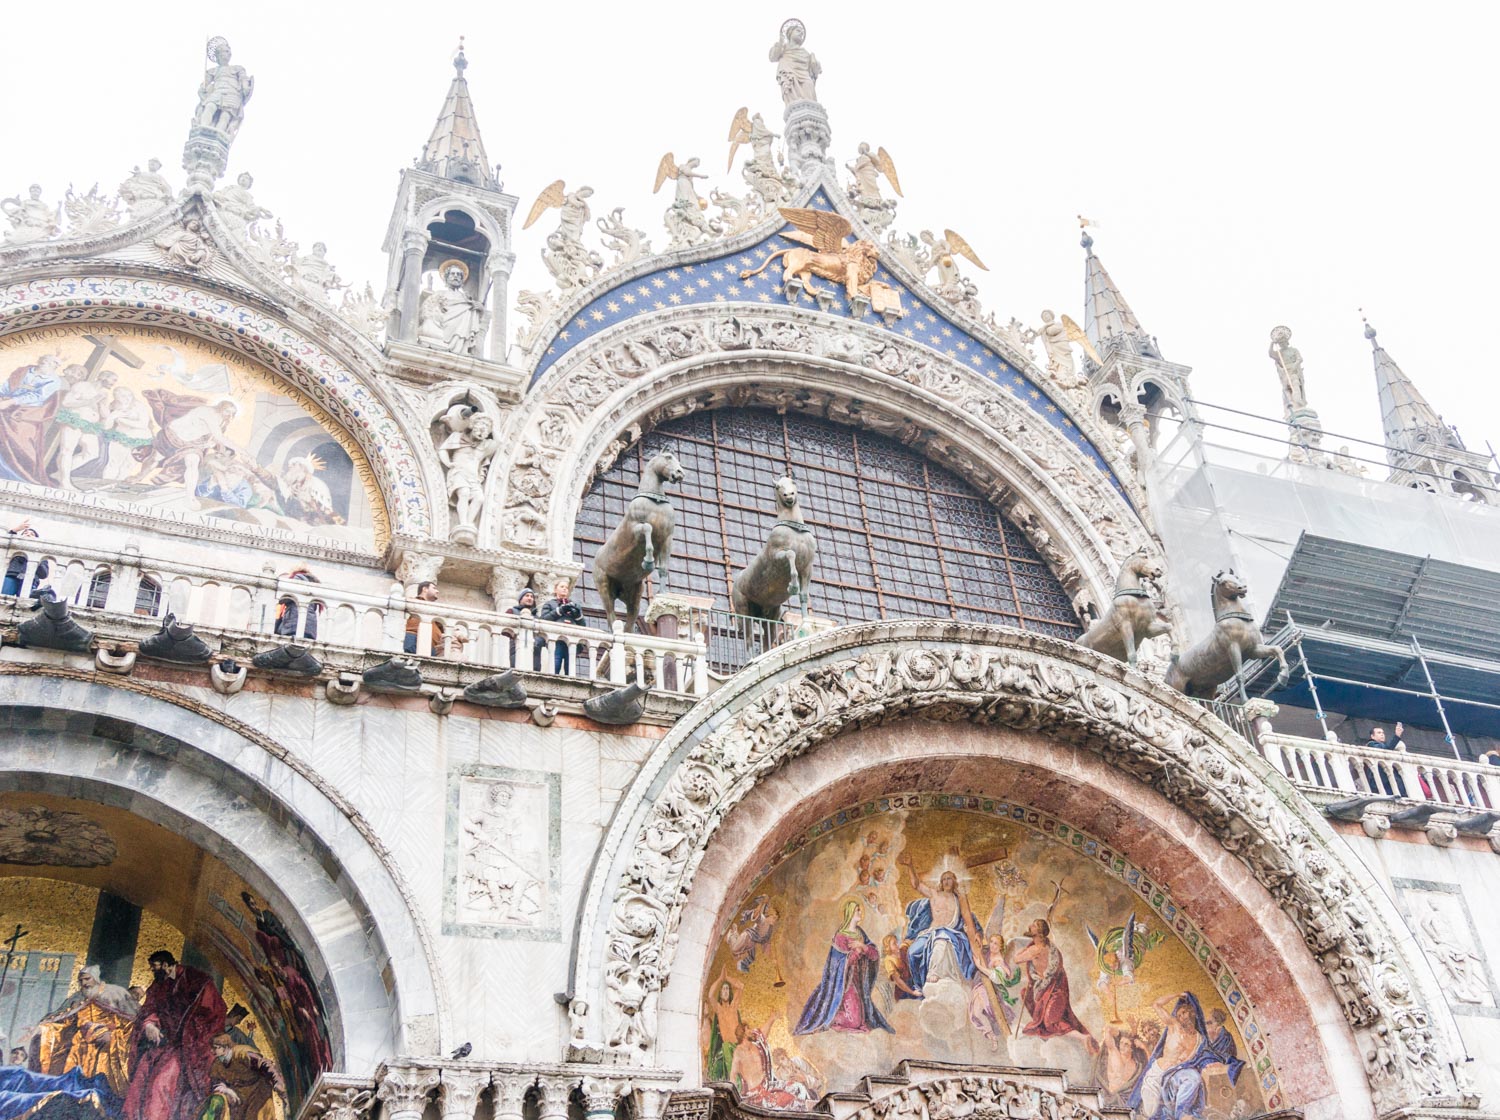 Sunday in Venice – Piazza San Marco and beyond